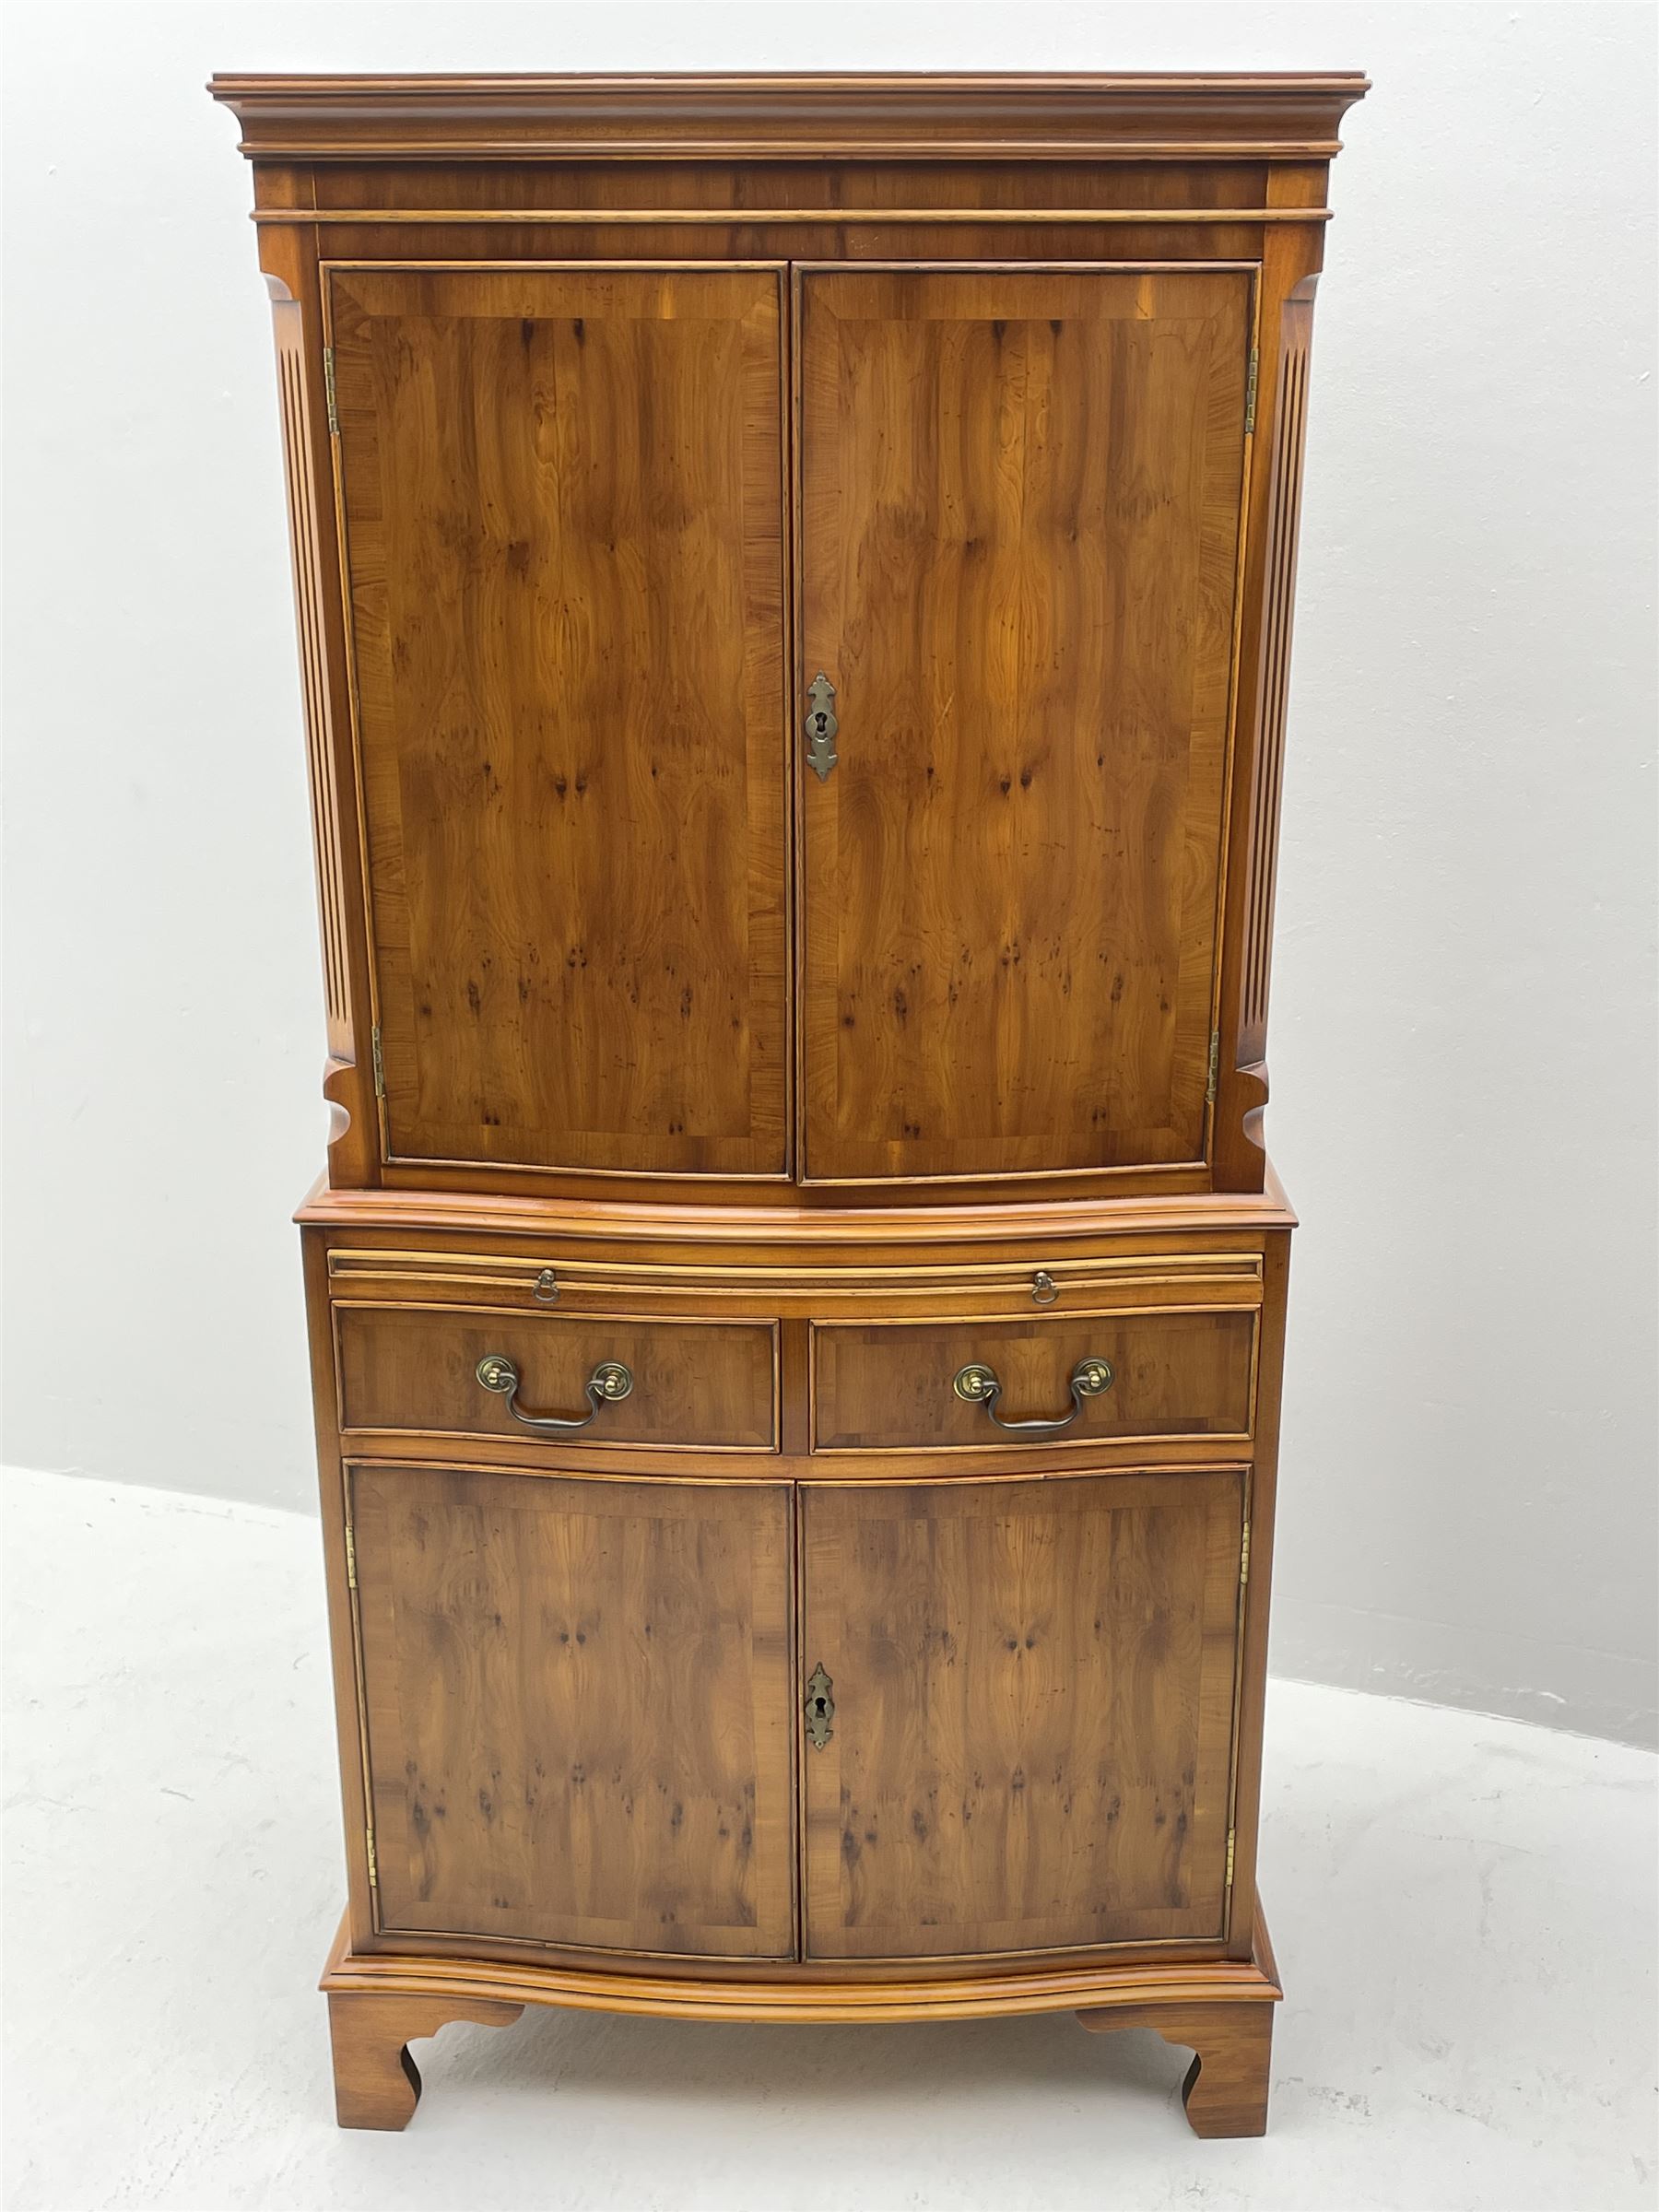 Bevan Funnell Reprodux yew wood cocktail drinks cabinet with illuminated interior - Image 2 of 4